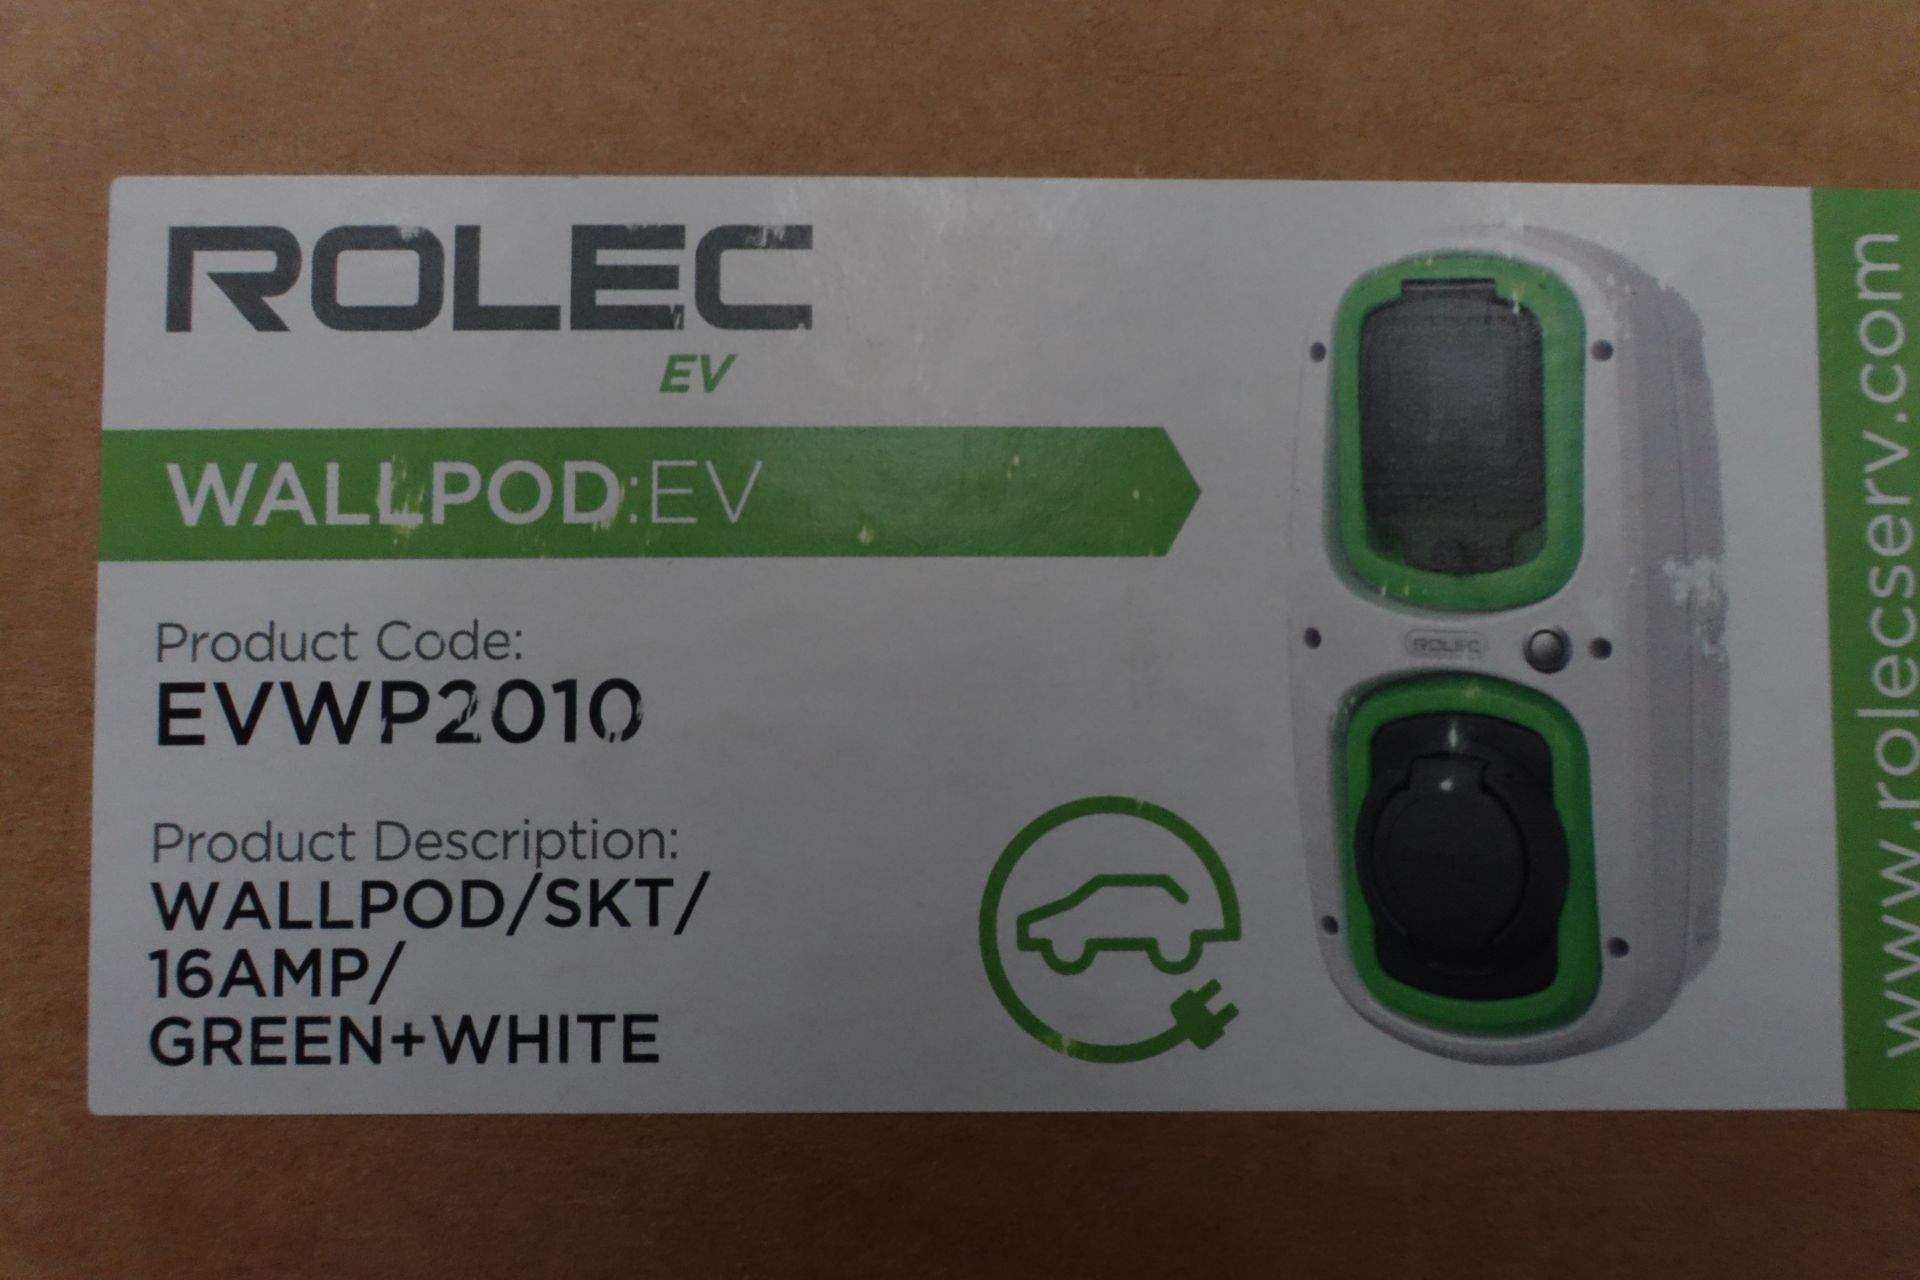 3 x ROLEC EVWP2010 16Amp Wall Pod/SKT Electric Car Charger Green/White